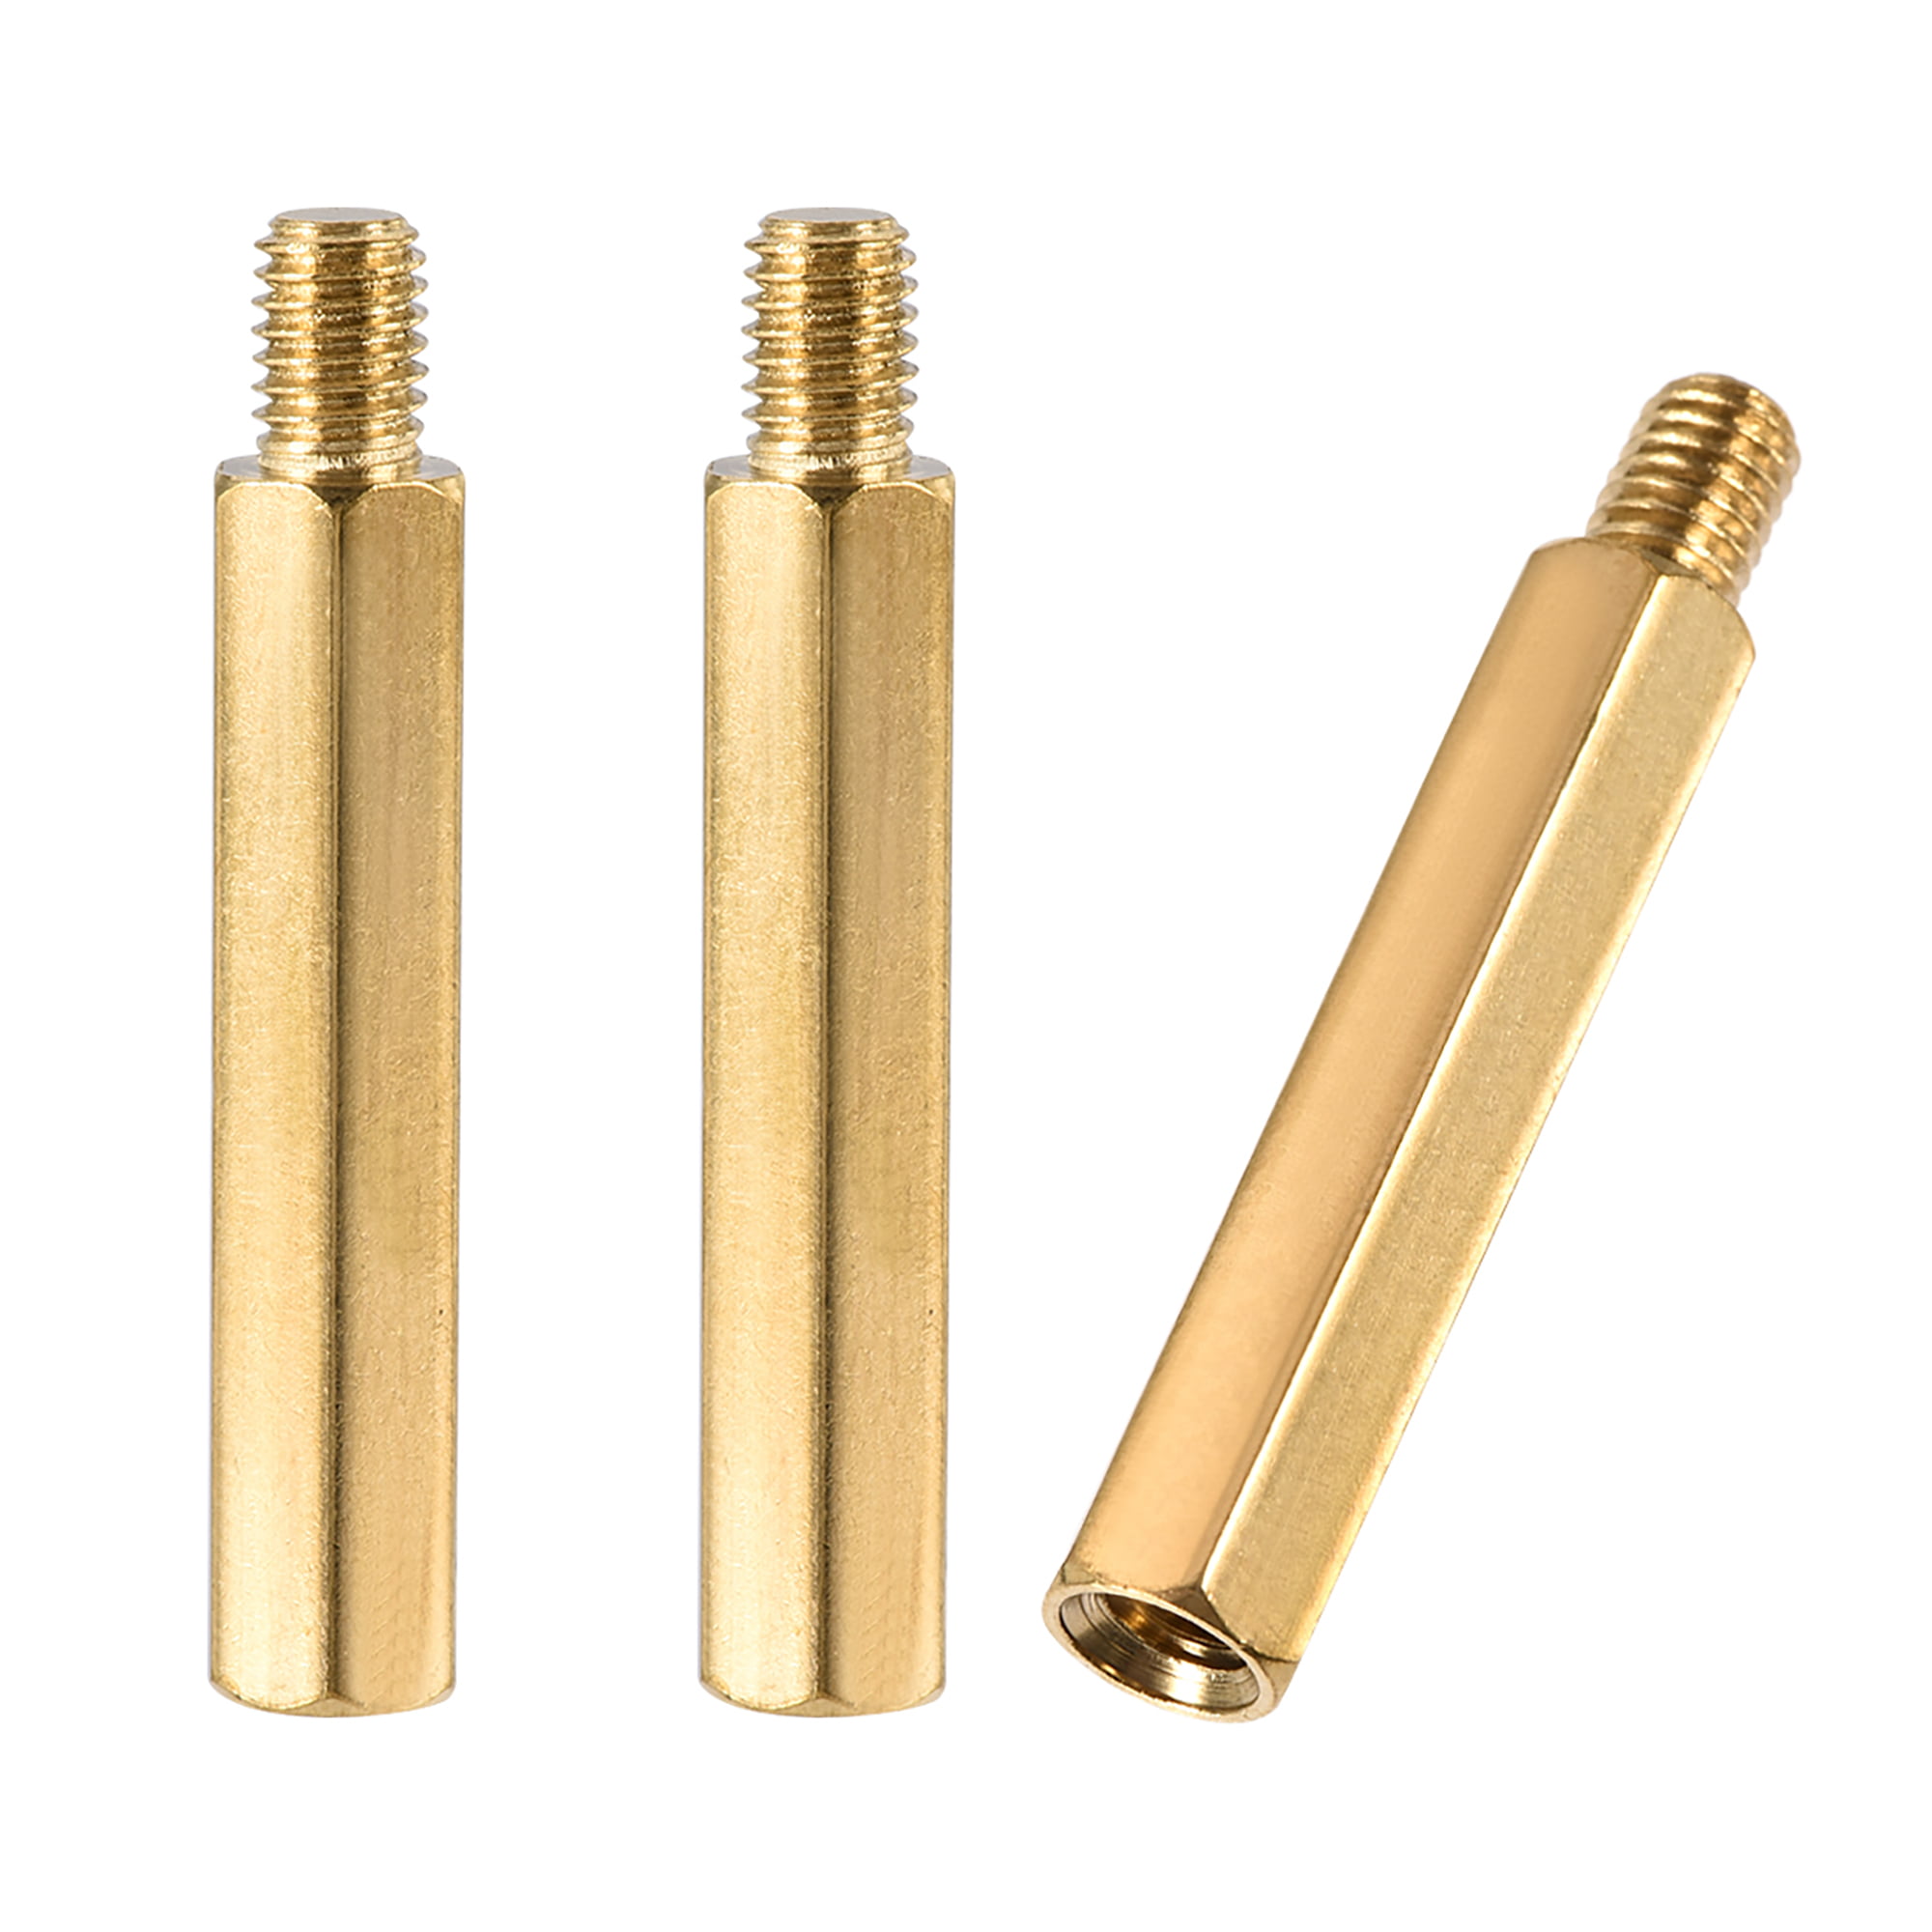 M5 x 35 mm + 7 mm Male to Female Hex Brass Spacer Standoff 3pcs 